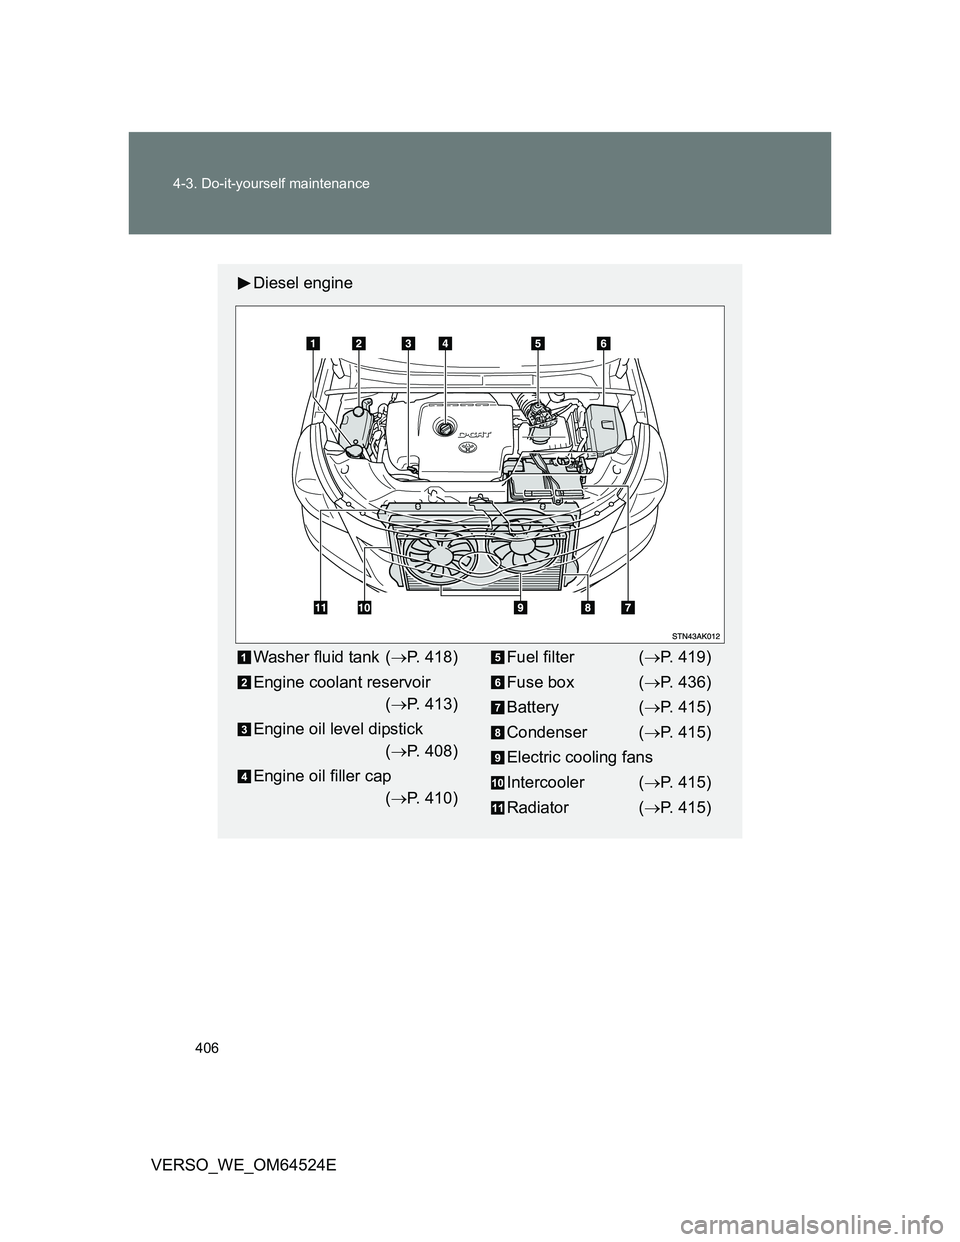 TOYOTA VERSO 2012  Owners Manual 406 4-3. Do-it-yourself maintenance
VERSO_WE_OM64524E
Diesel engine
Washer fluid tank (P. 418)
Engine coolant reservoir 
(P. 413)
Engine oil level dipstick 
(P. 408)
Engine oil filler cap 
(�